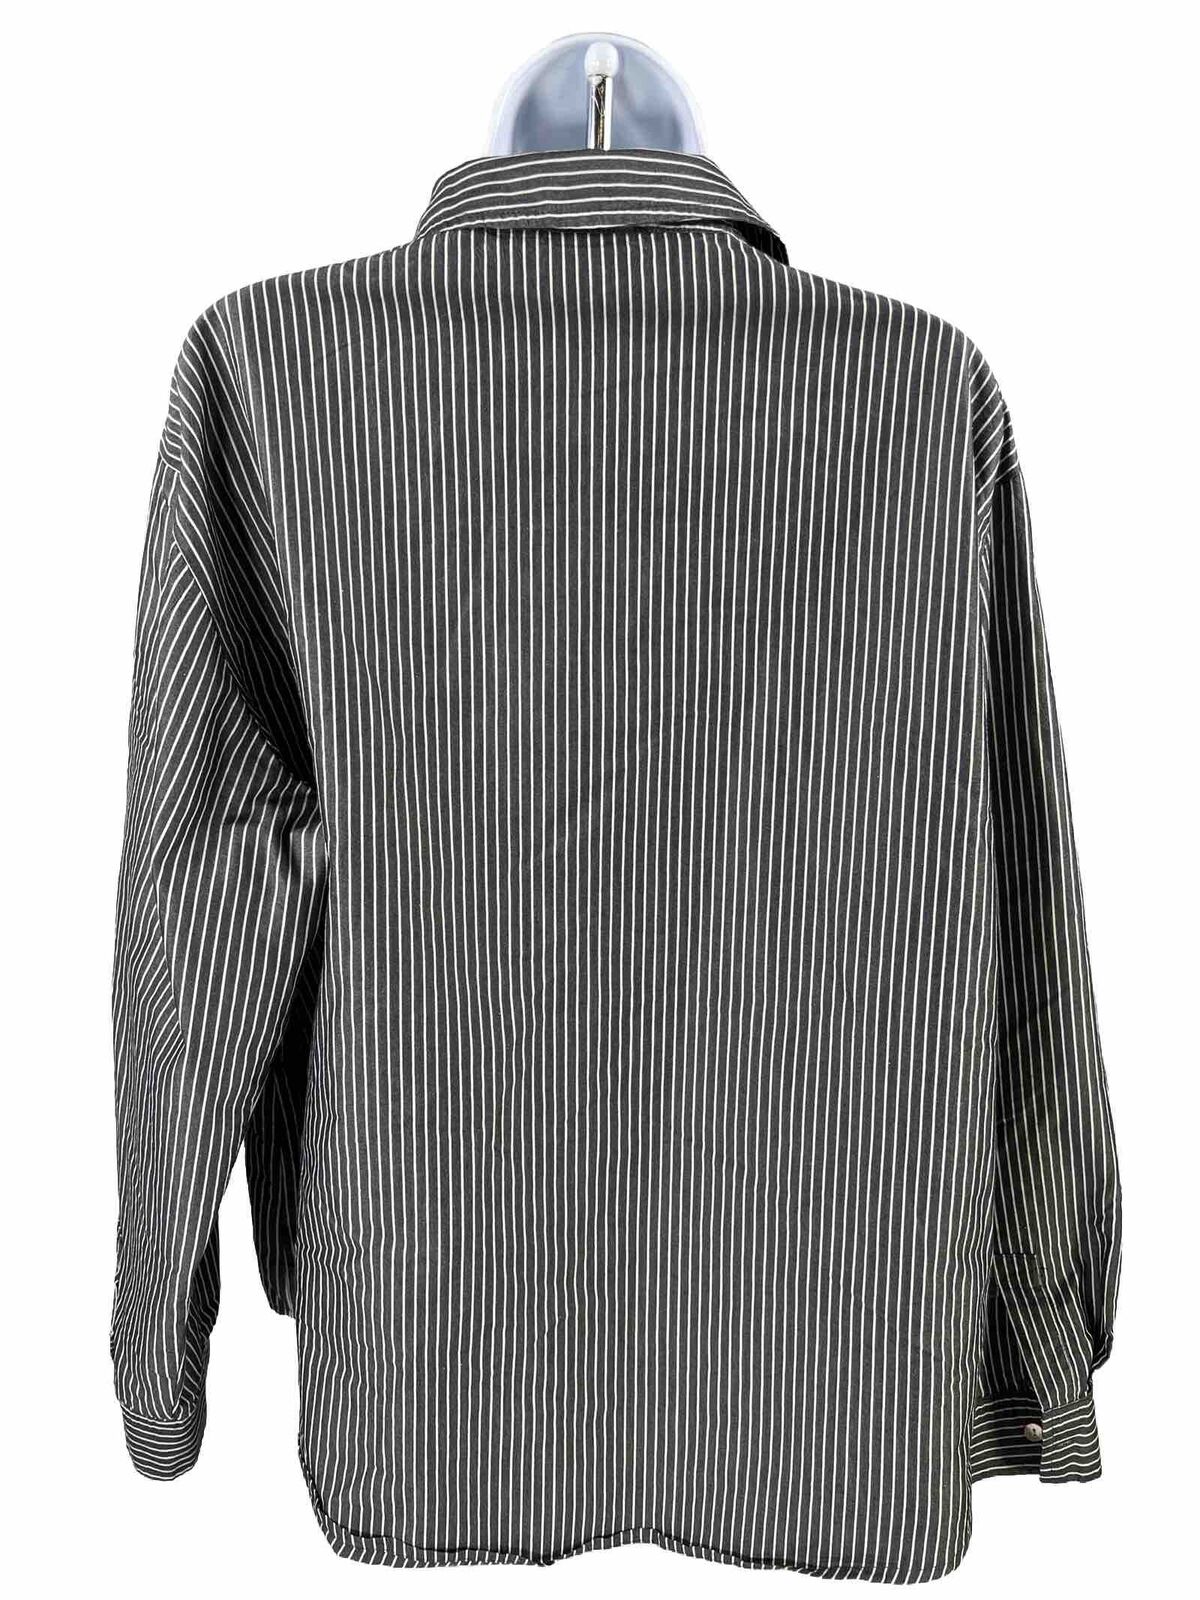 Chico's Women's Gray Striped Long Sleeve Button Up Top - 3/US 16